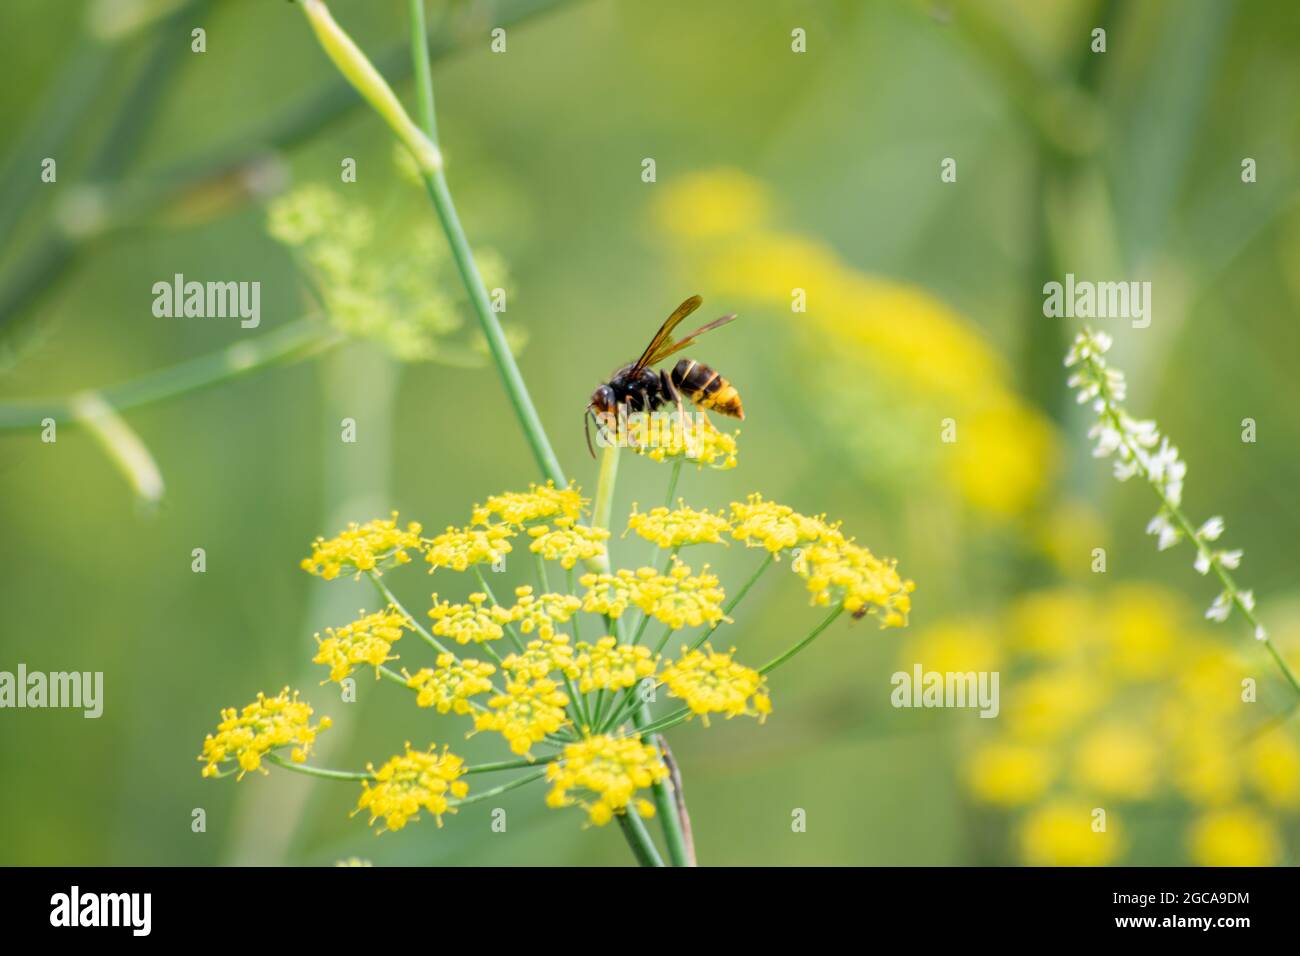 The Asian hornet on fennel also known as the yellow-legged hornet or Asian predatory wasp, is a species of hornet indigenous to Southeast Asia. Stock Photo